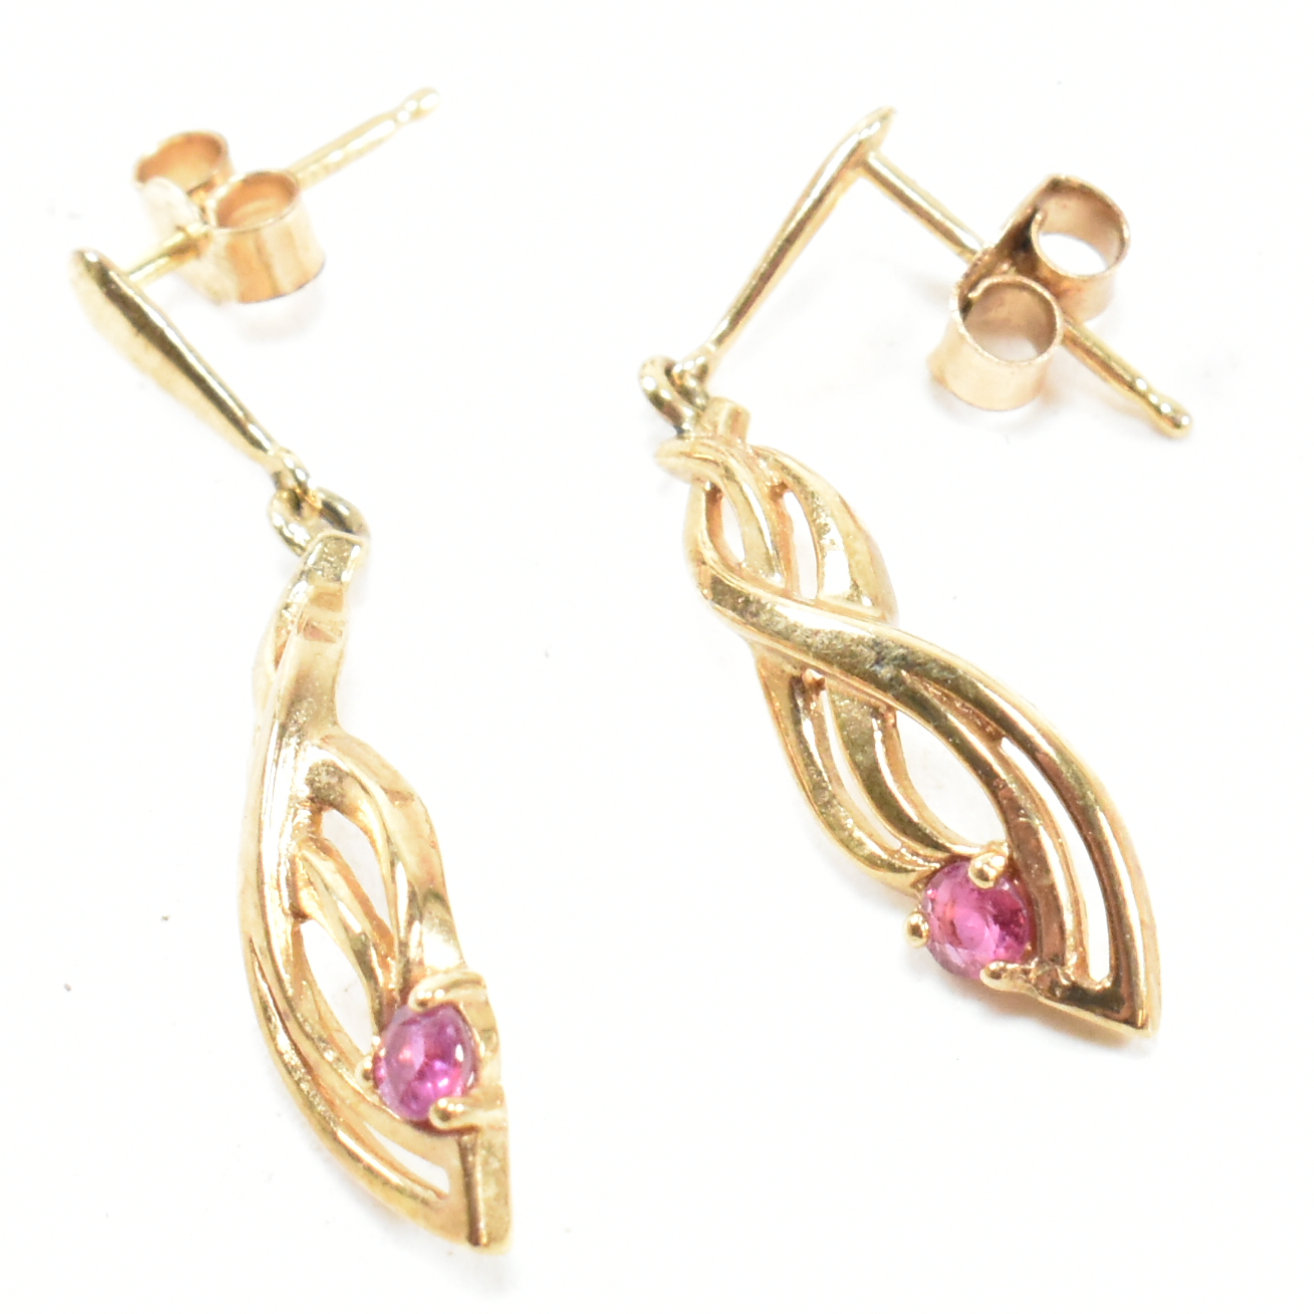 COLLECTION OF 9CT GOLD & GEM SET EARRINGS - Image 3 of 4